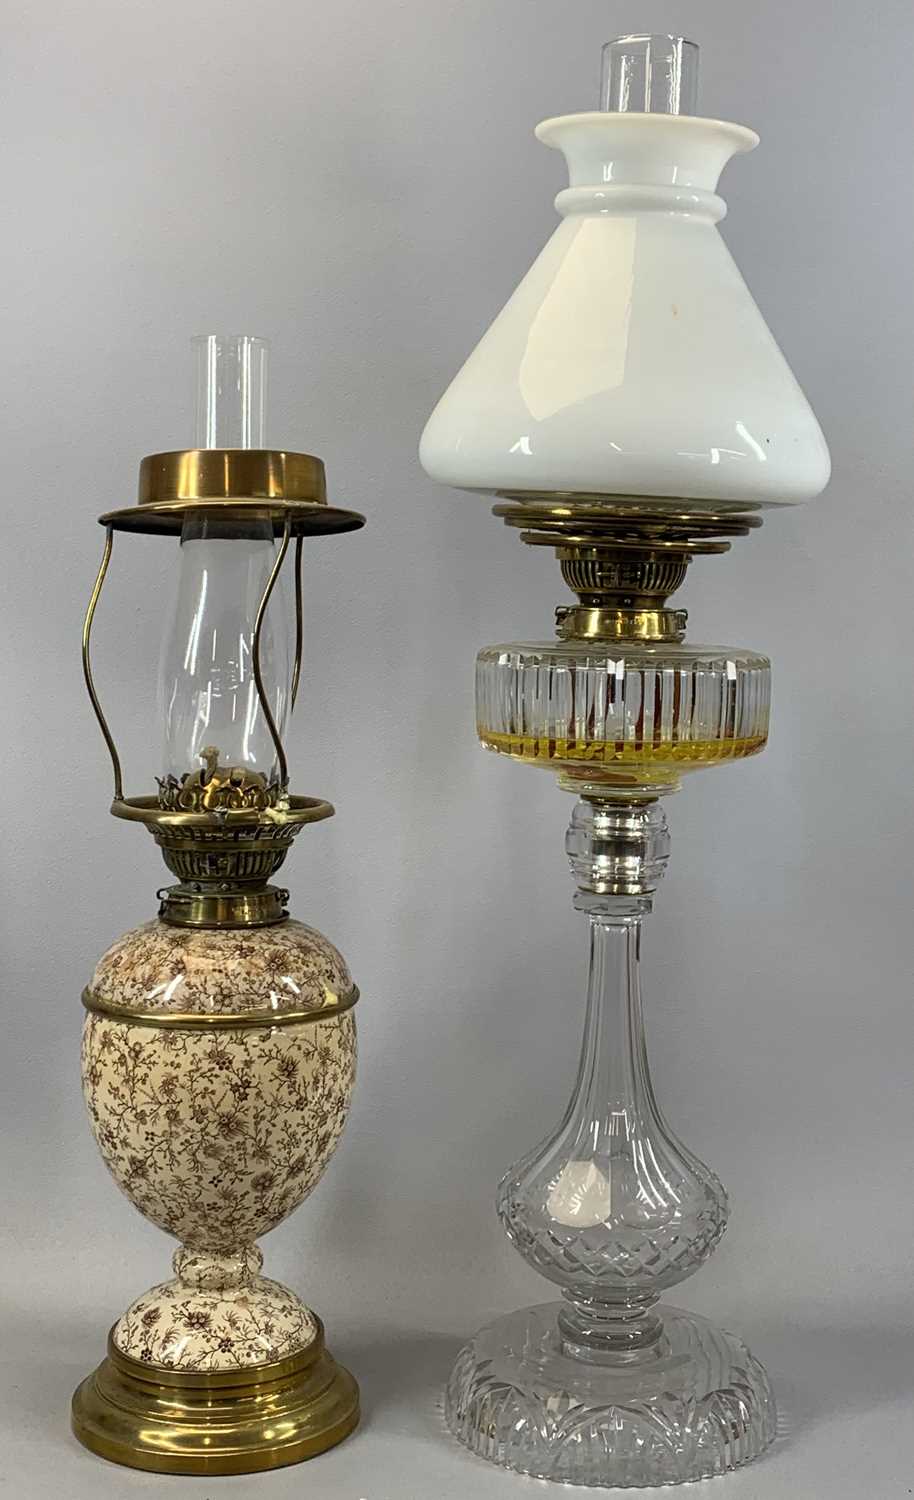 VICTORIAN BRASS & CERAMIC OIL LAMP with twin duplex burners, 33cms (h) excluding fitting, and good - Image 2 of 2